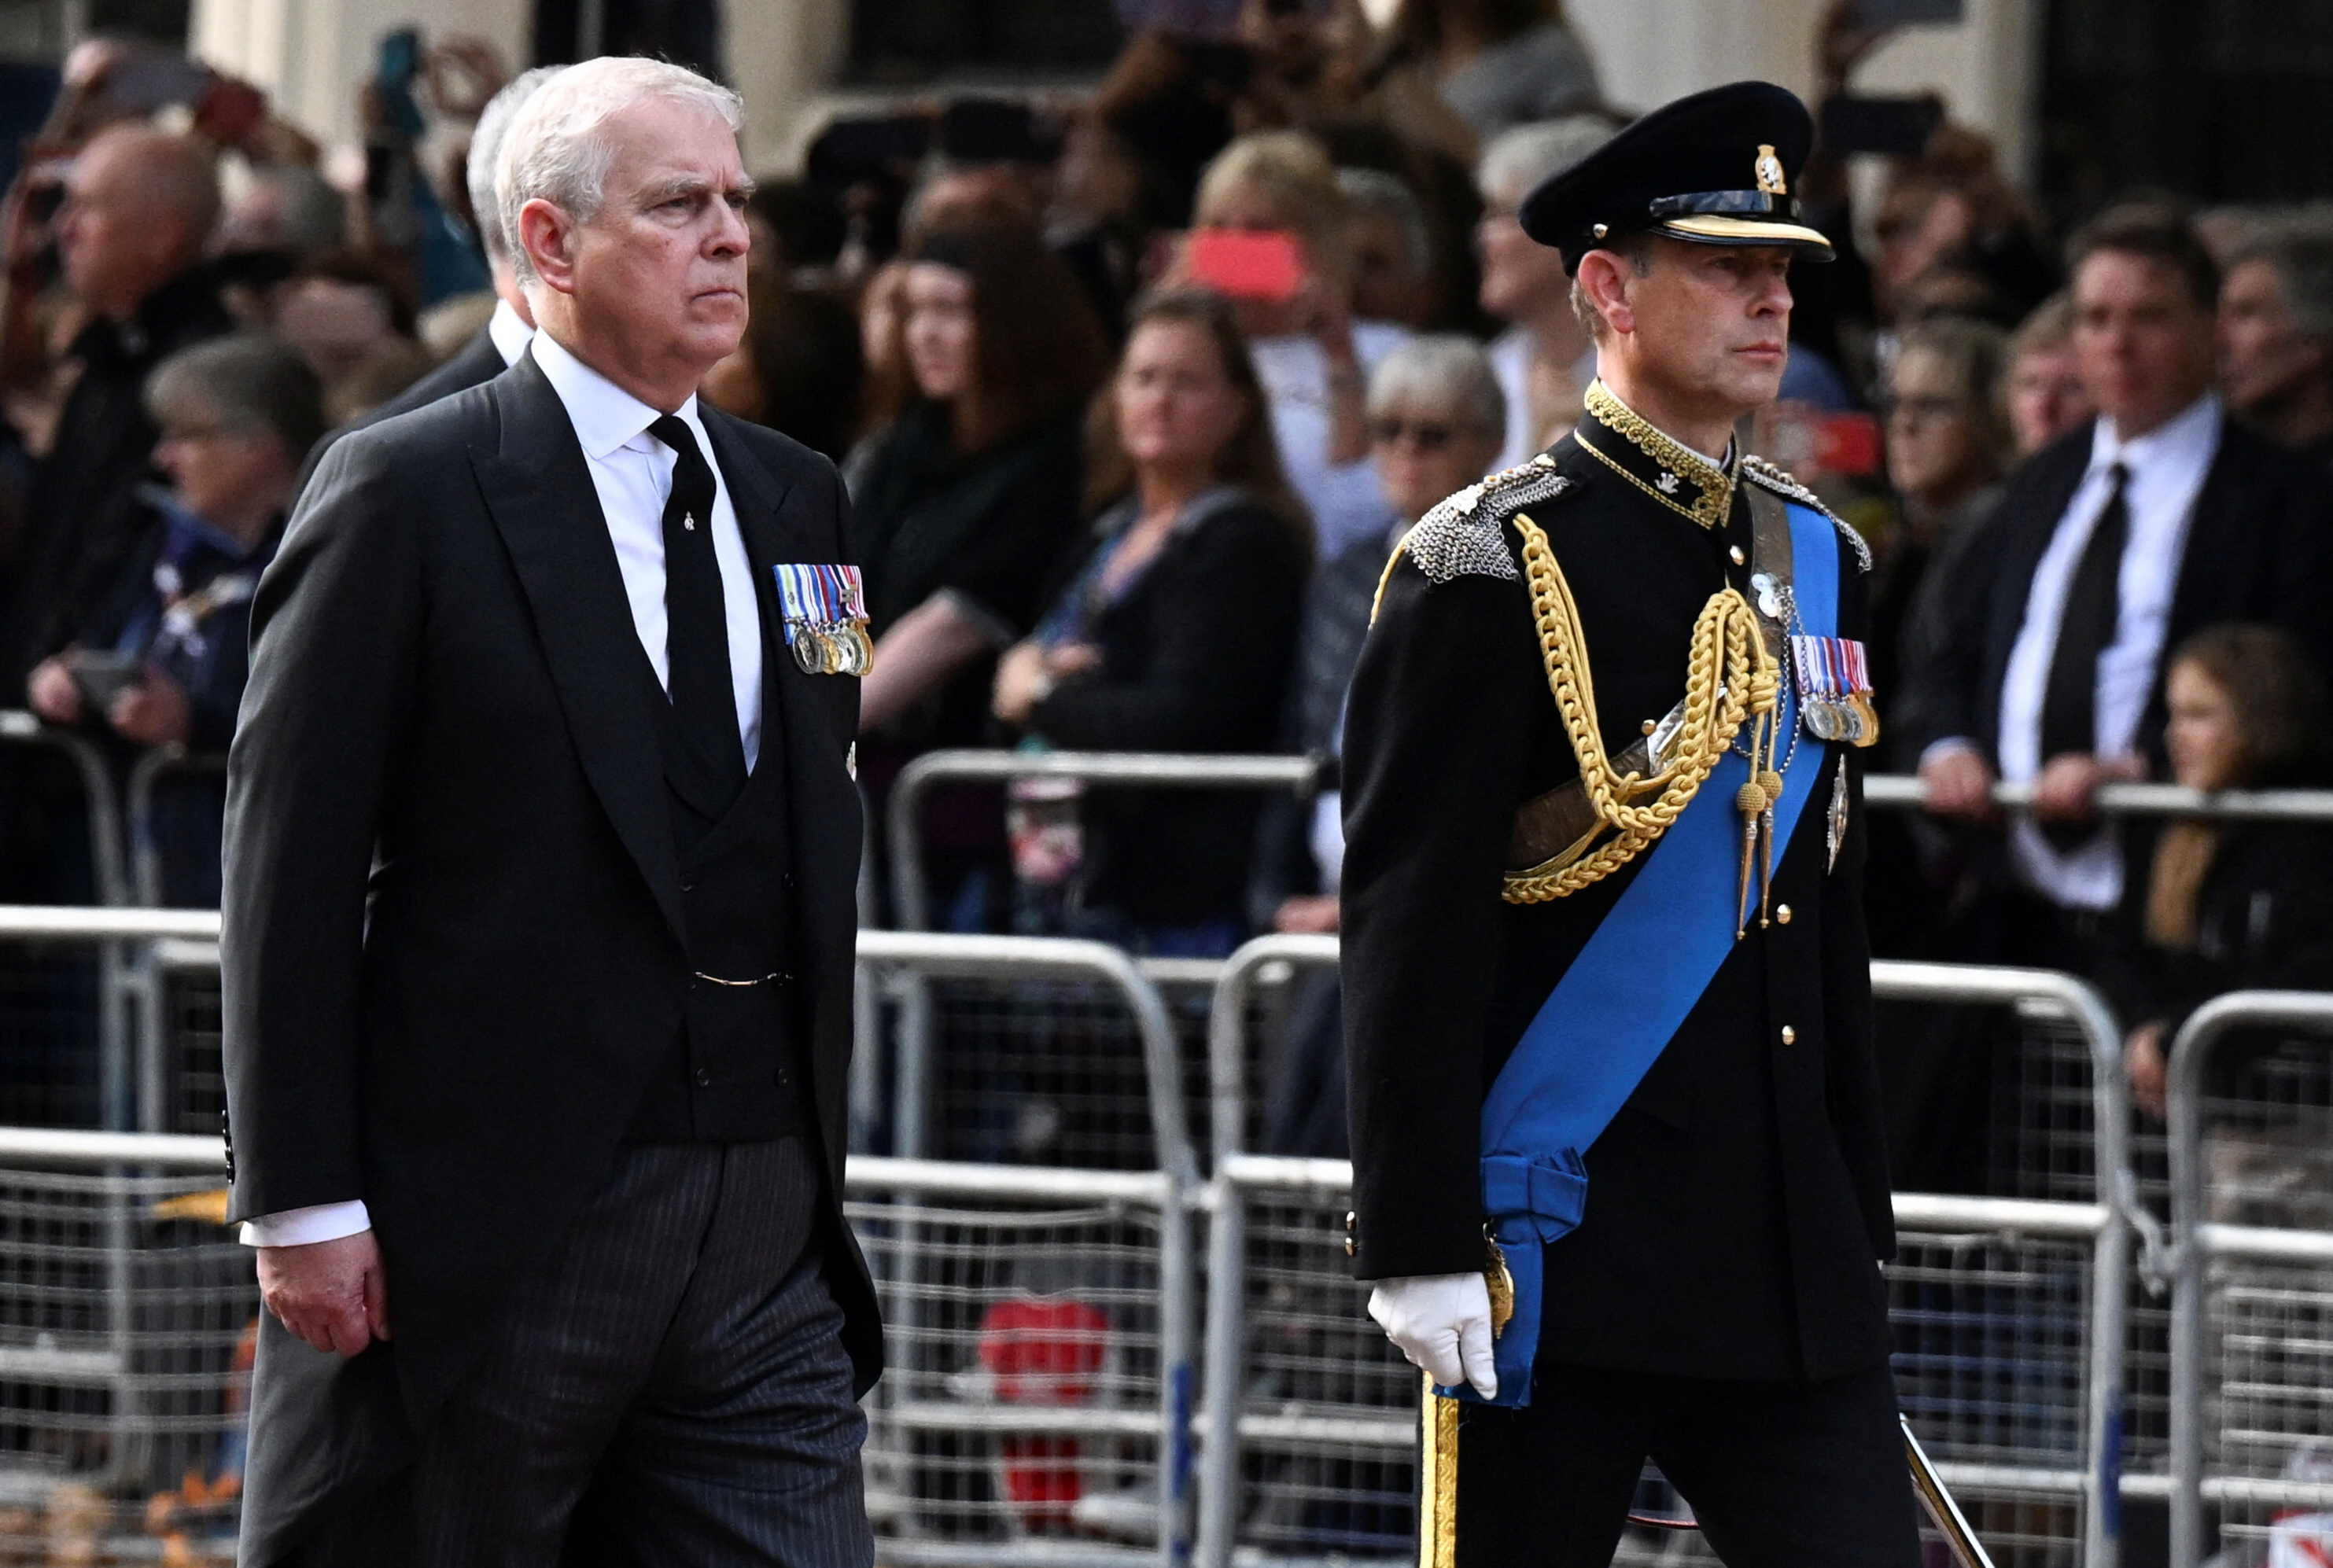 Mother Dress Changes Son Force Sex - Disgraced Prince Andrew, back in the spotlight but still out in the cold |  Reuters